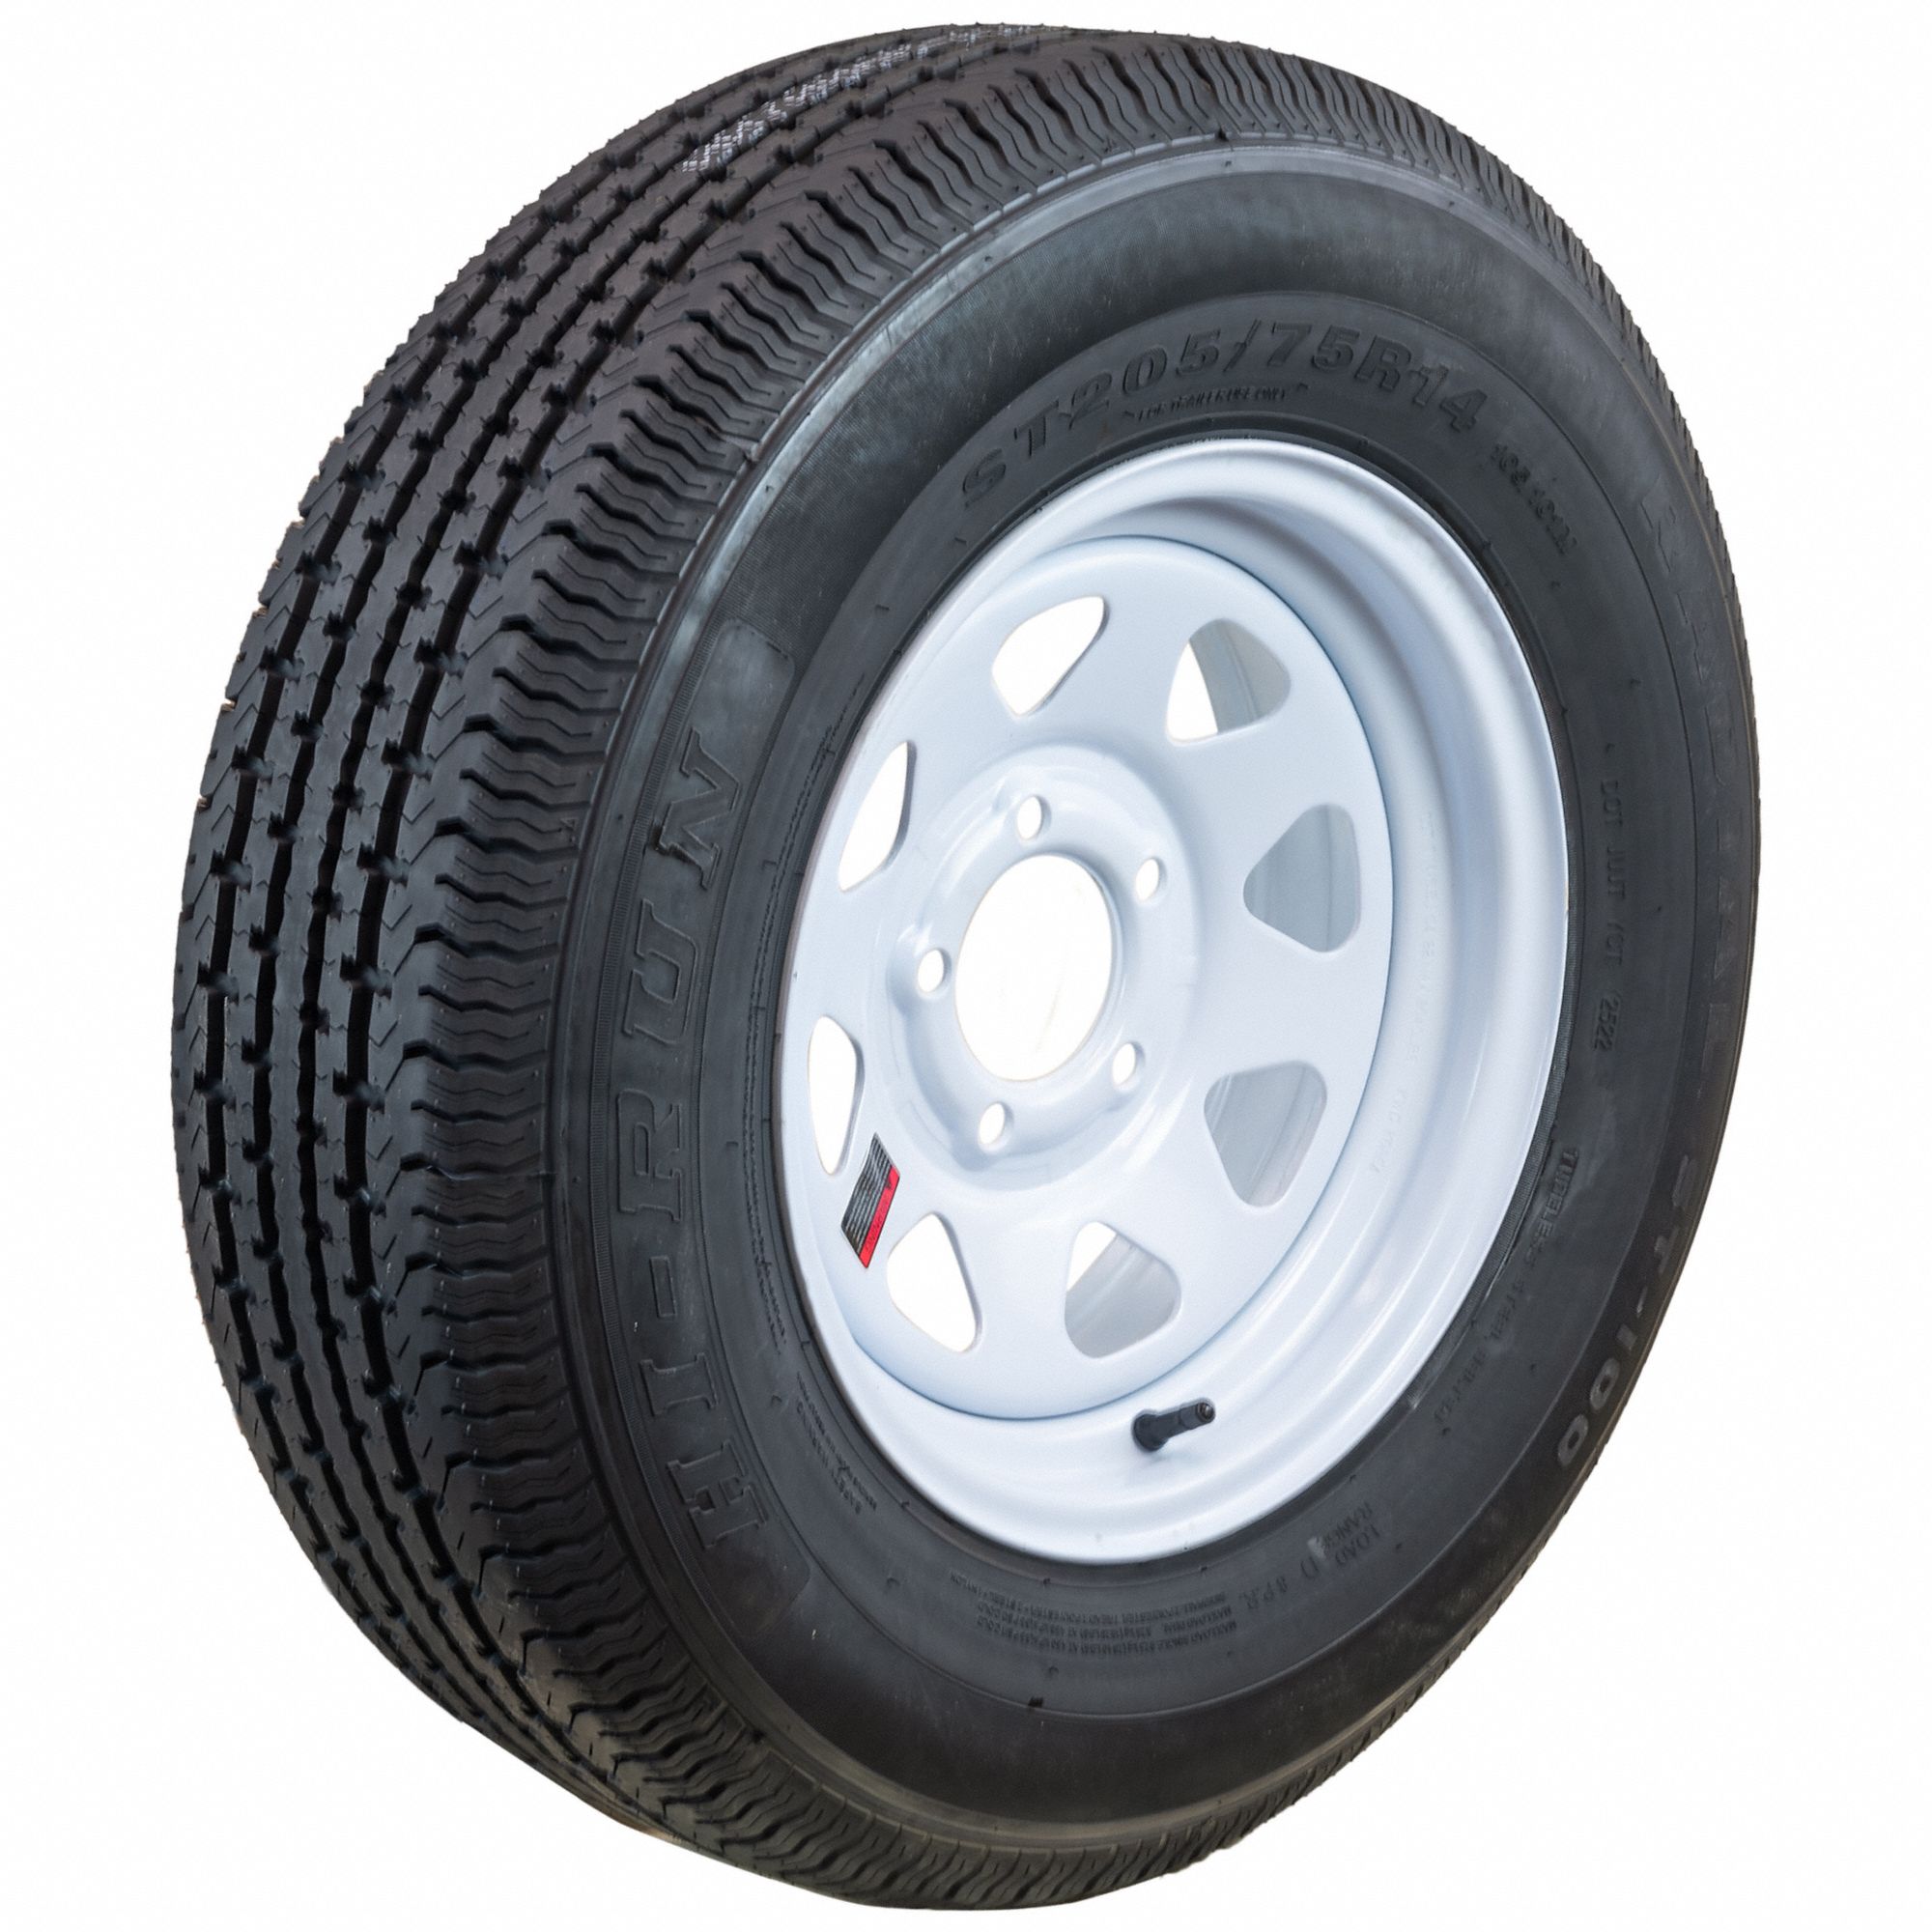 HI-RUN, Street Tire and Wheel Assembly, 14X6 5-4.5 Tire Size